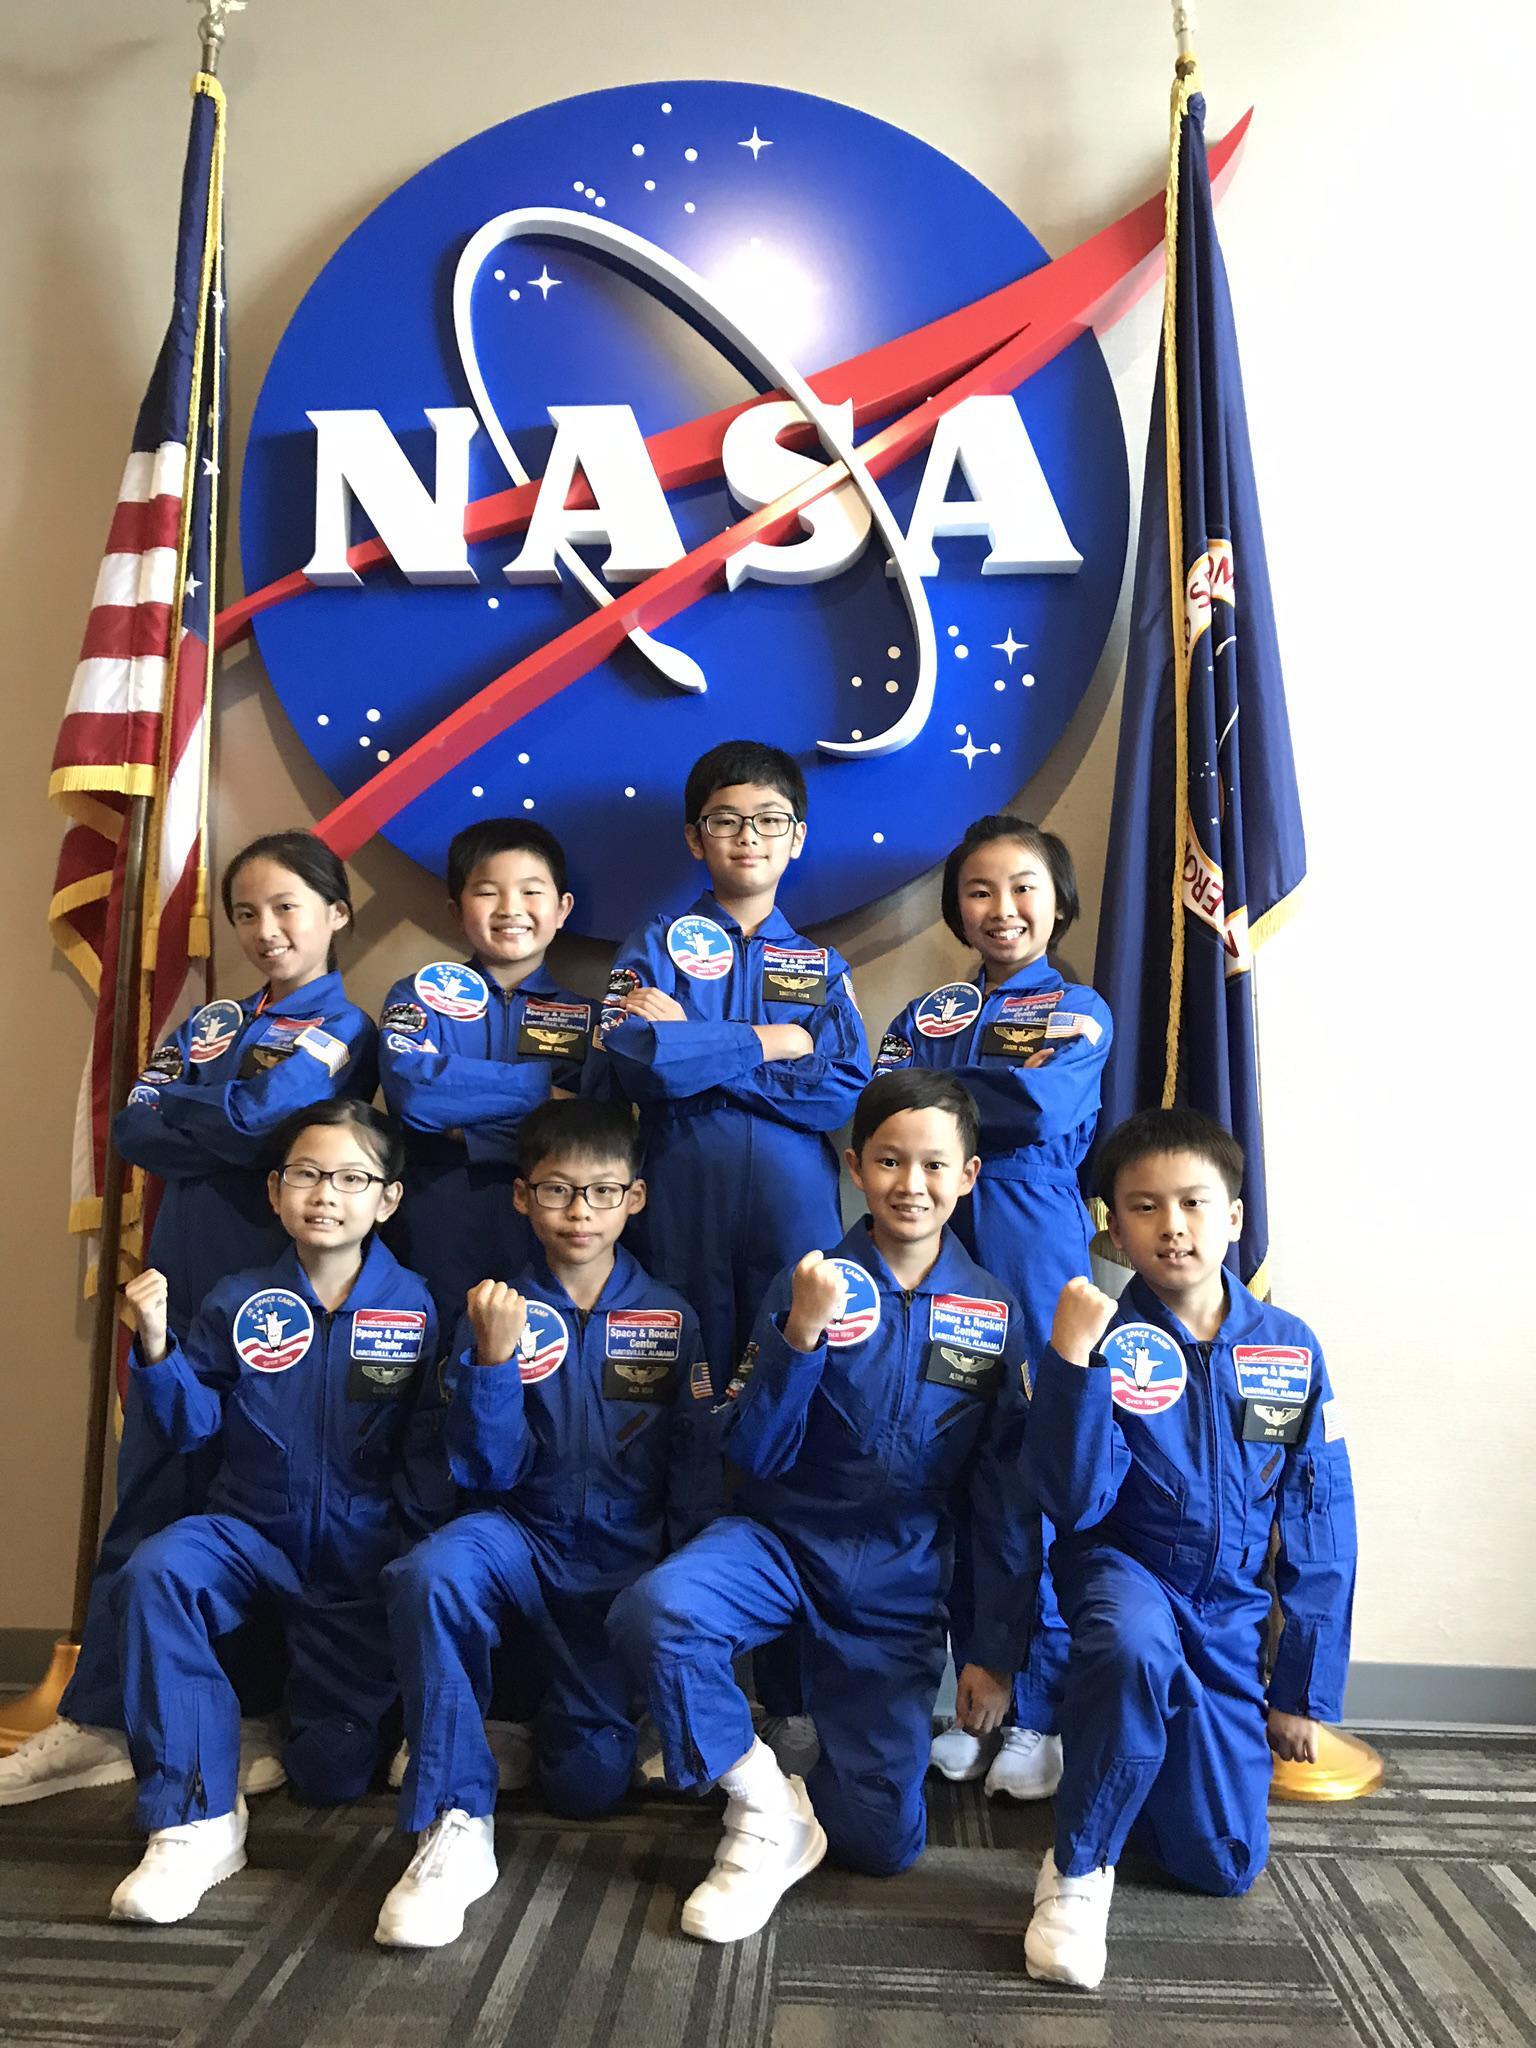 The eight Jr. Astronauts all lived the "It is Possible!" spirit to successfully complete various challenging missions during their nine-day Space-Exploration Journey.